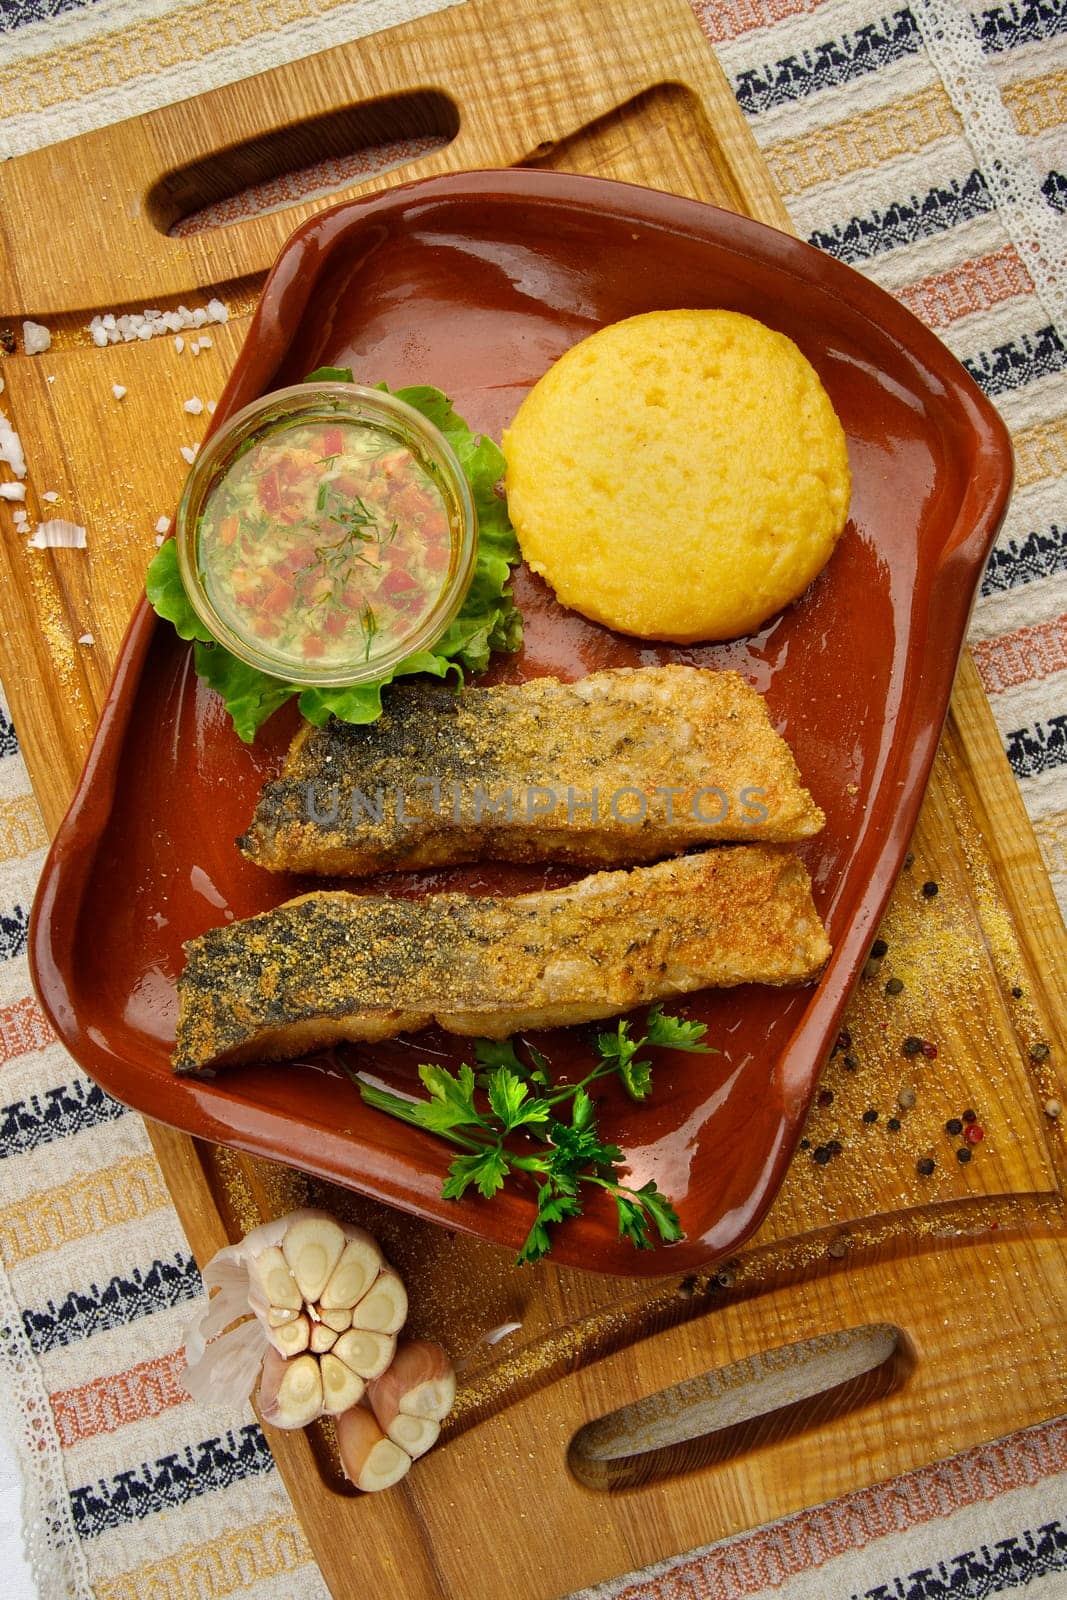 Whole fried fish in a red plate served with mamaliga and garlic souce